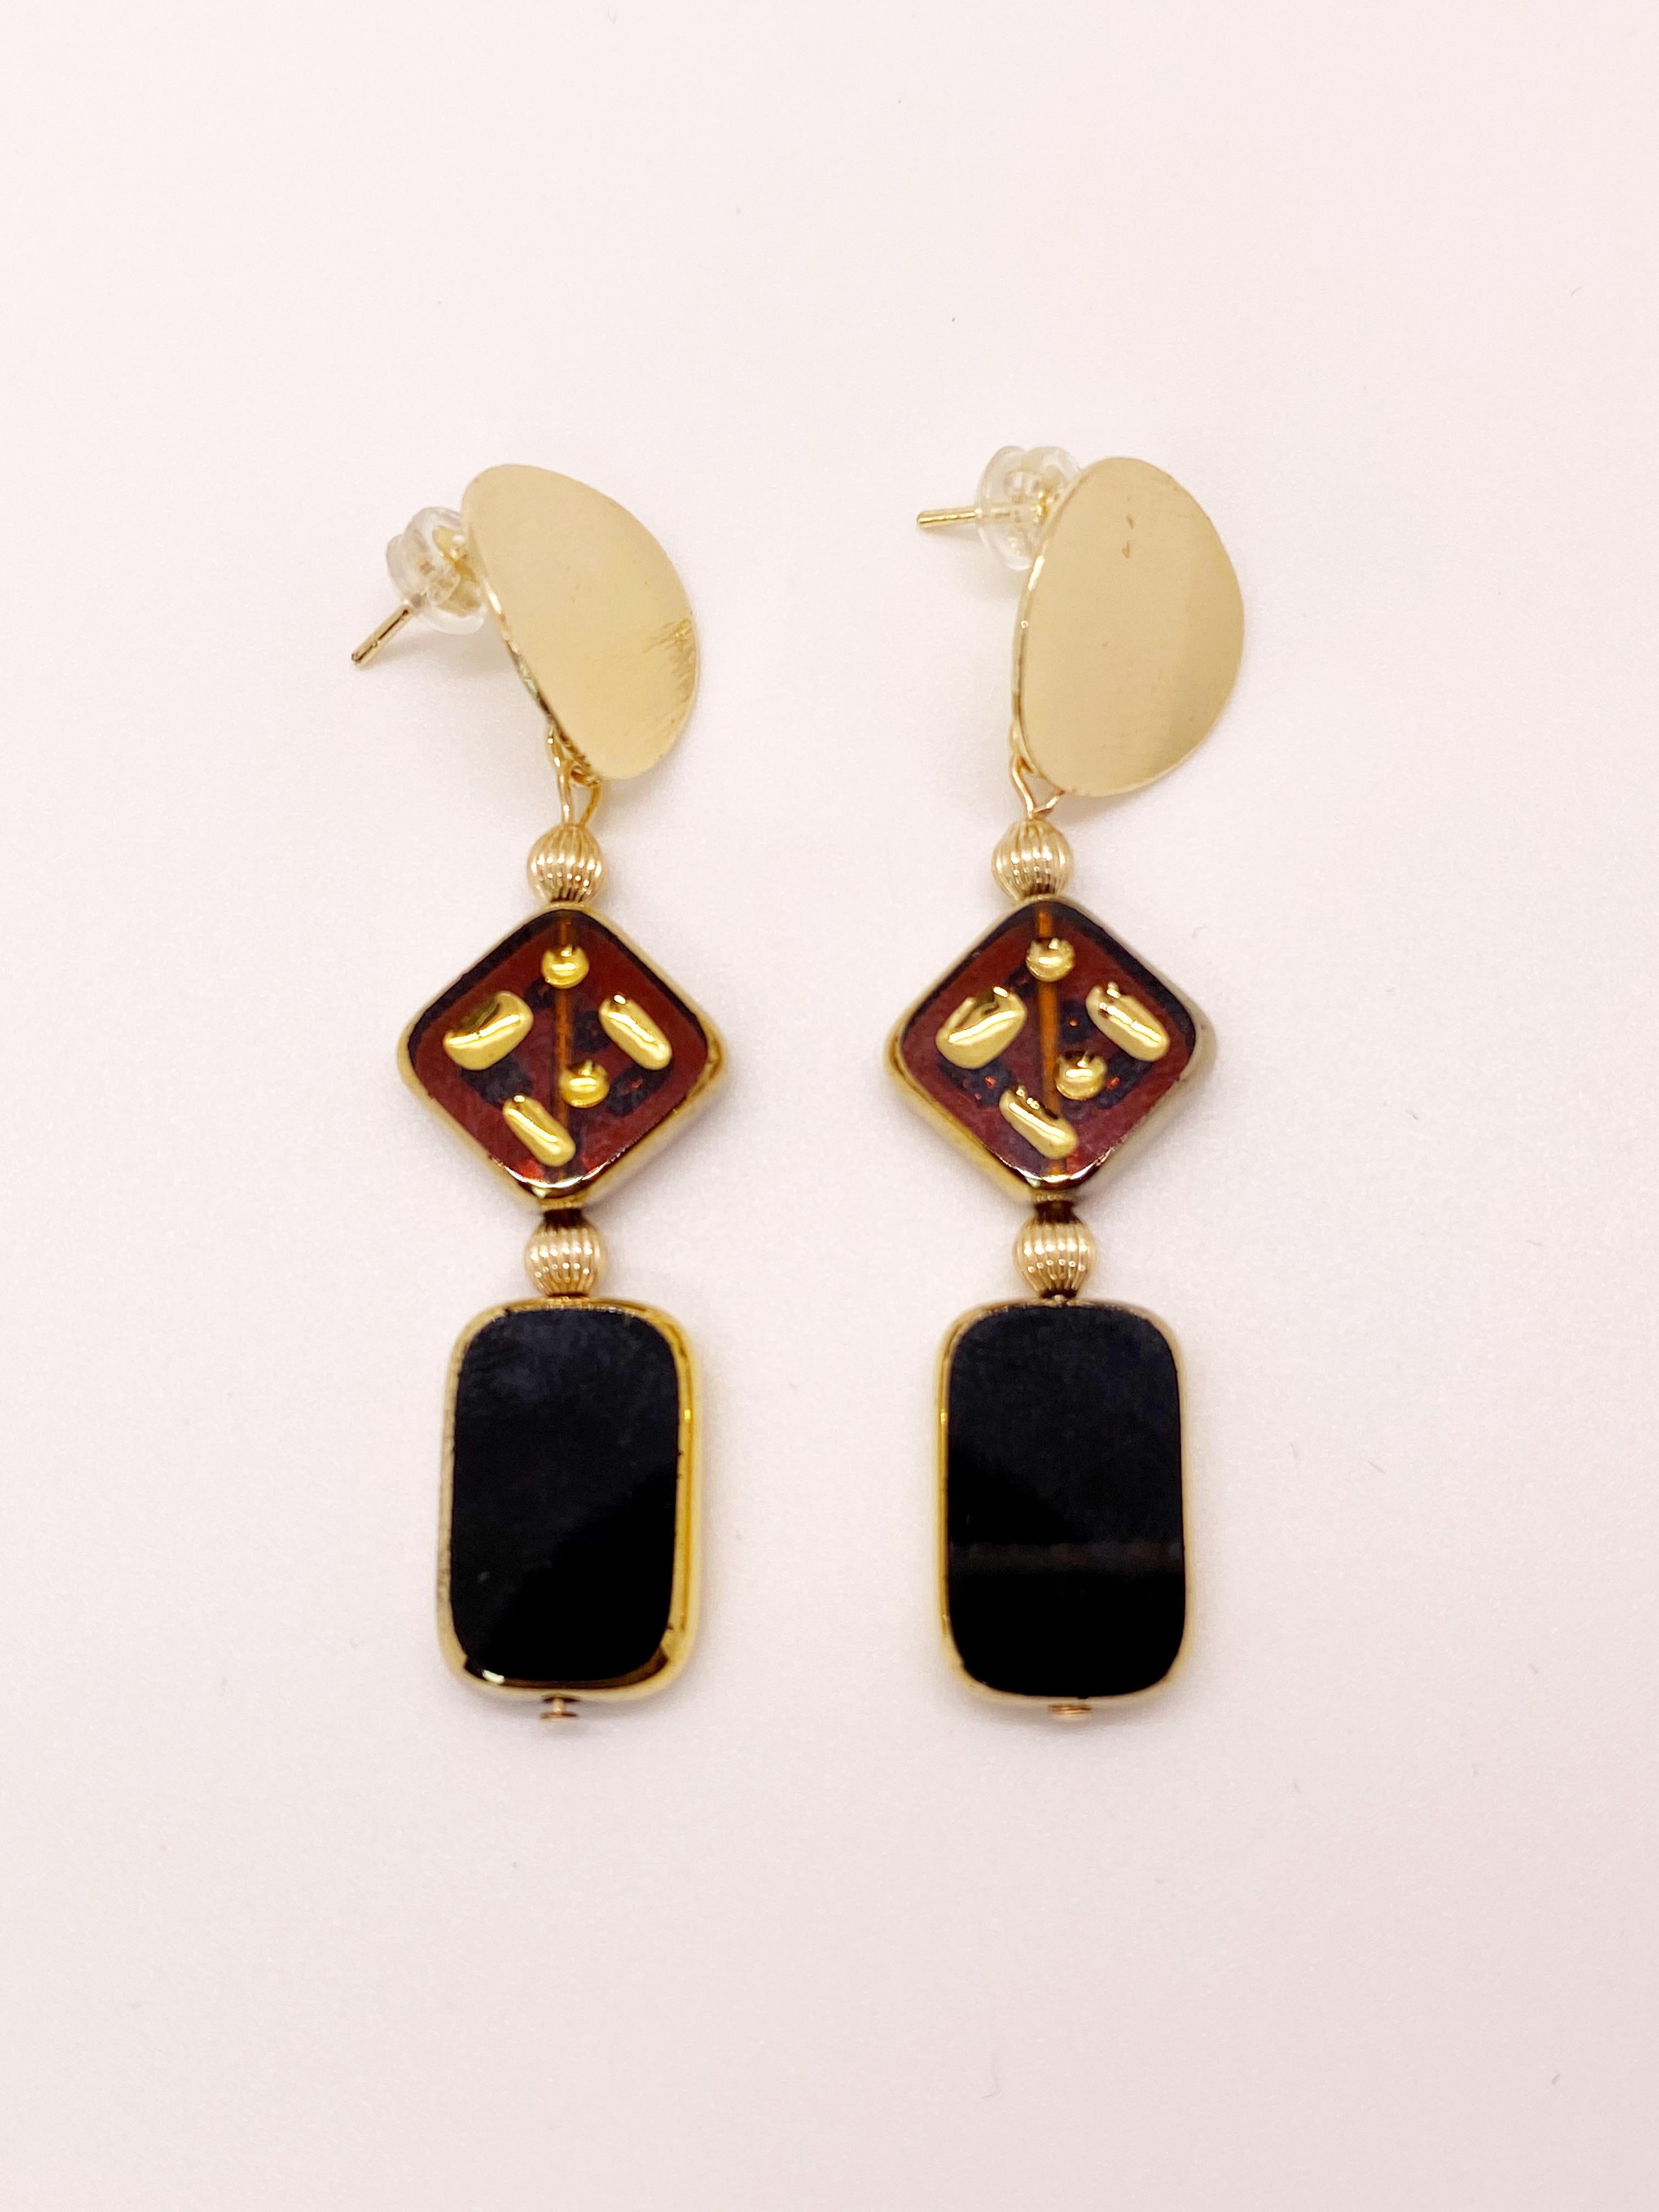 These earrings are composed of a translucent brown amber glass beads with etched design and a black tile bead. These are vintage German glass beads that have been edged with 24K gold. They dangle on 14K gold-filled ear finding post. 

The German